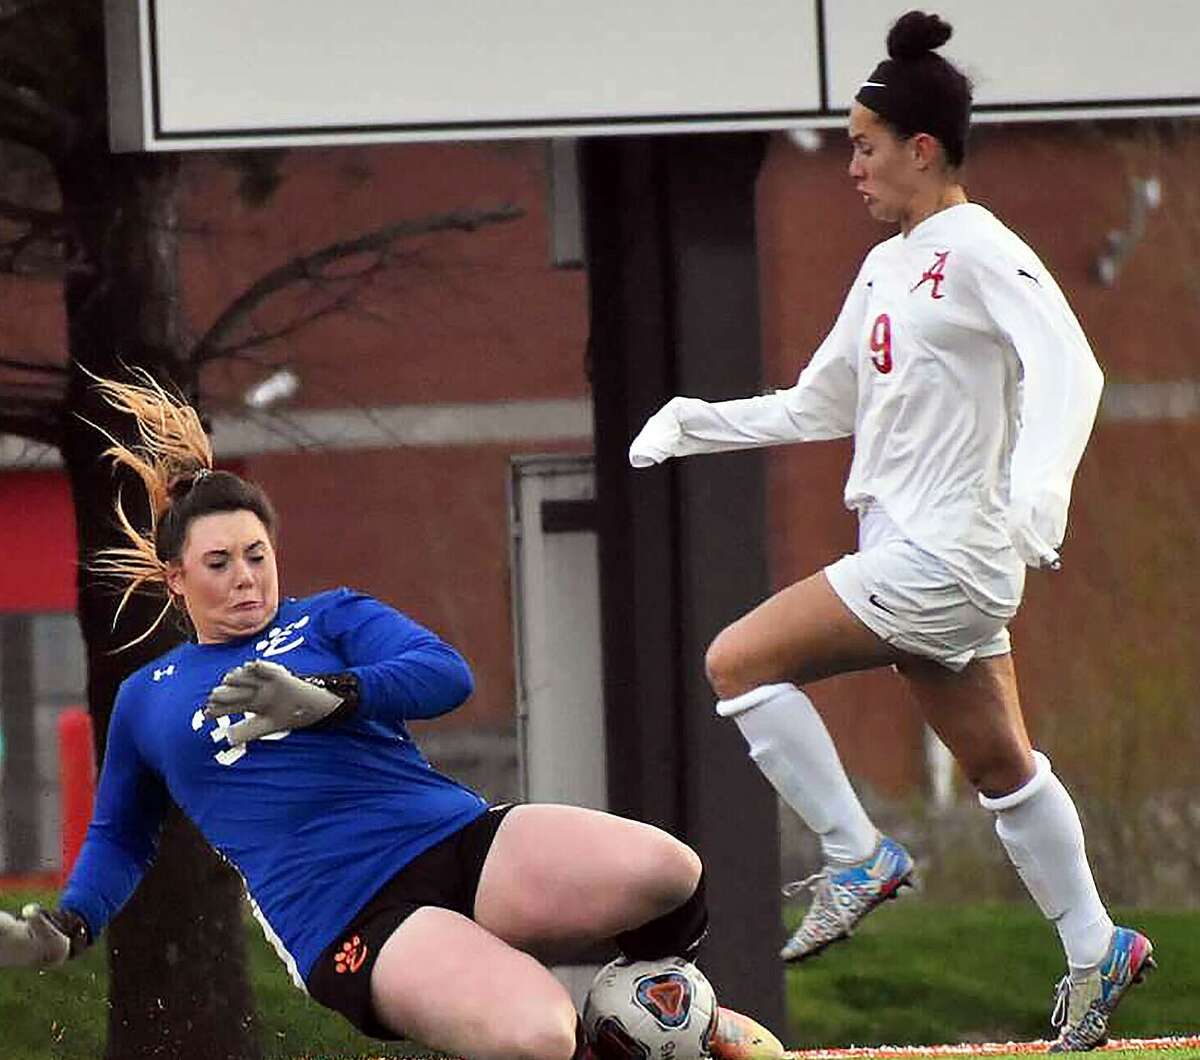 Alton's Emily Baker, right, scored a goal in her team's 2-0 win over Collinsville Tuesday.